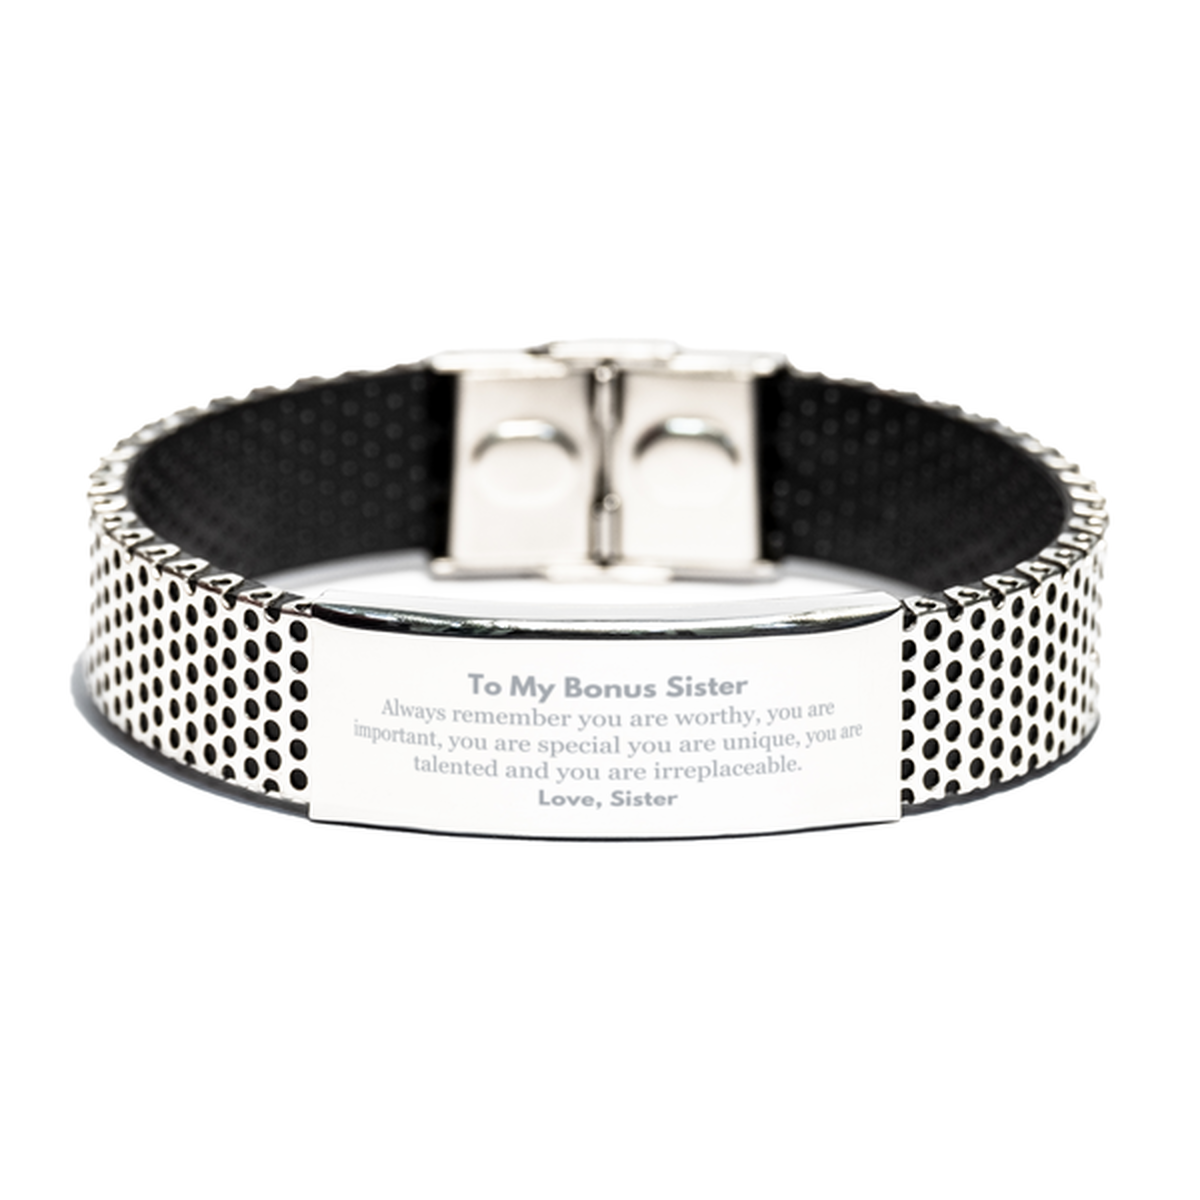 Bonus Sister Birthday Gifts from Sister, Inspirational Stainless Steel Bracelet for Bonus Sister Christmas Graduation Gifts for Bonus Sister Always remember you are worthy, you are important. Love, Sister